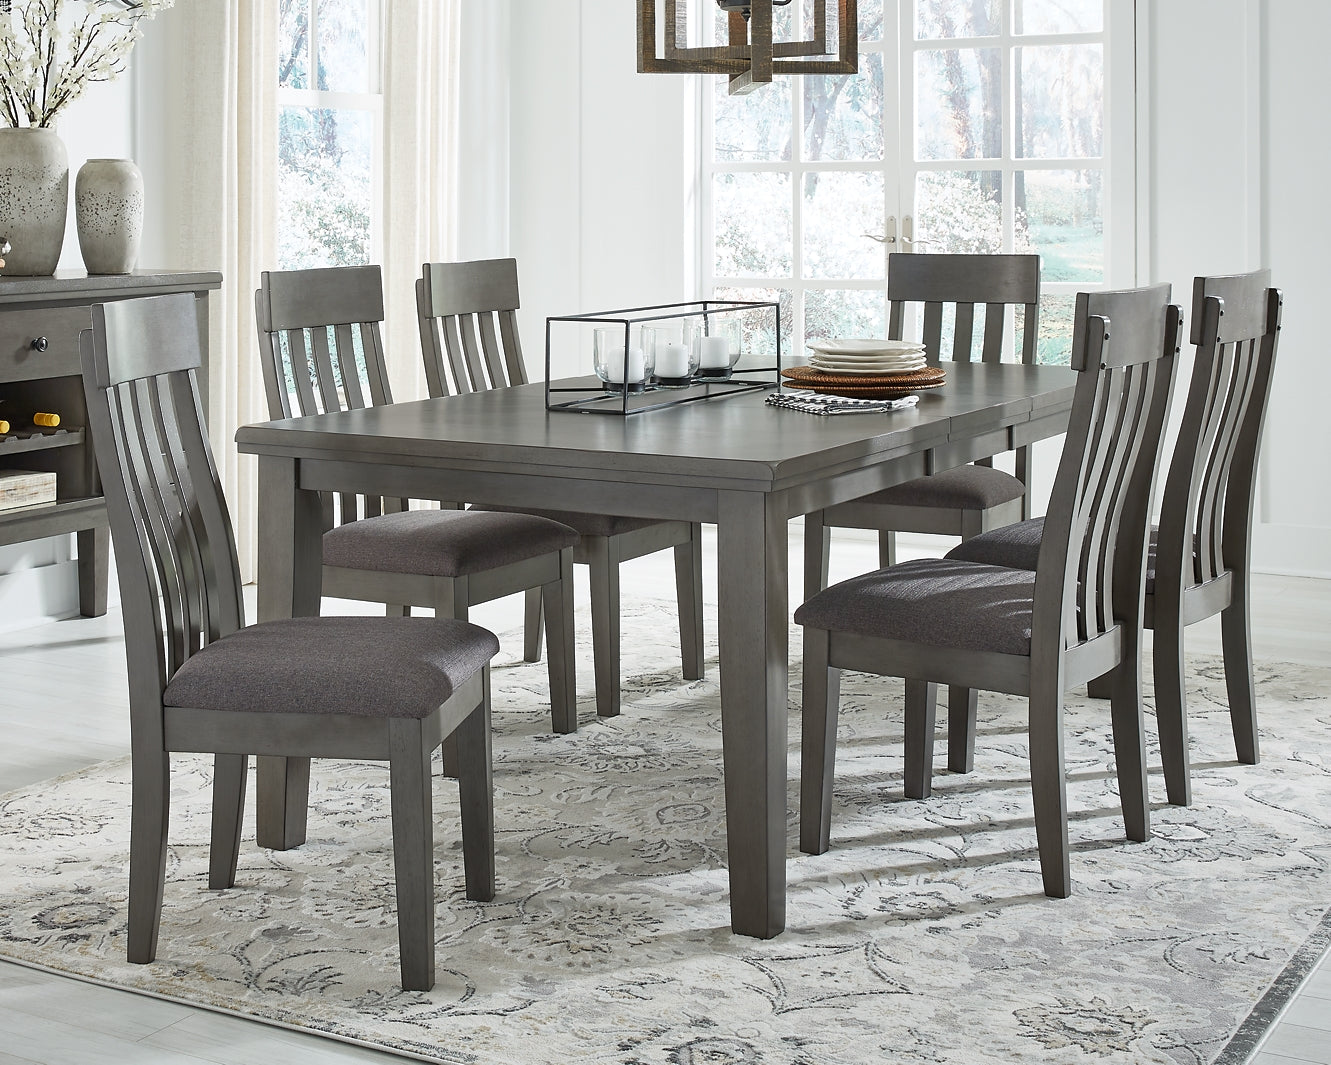 Hallanden Dining Table and 6 Chairs with Storage JB's Furniture  Home Furniture, Home Decor, Furniture Store